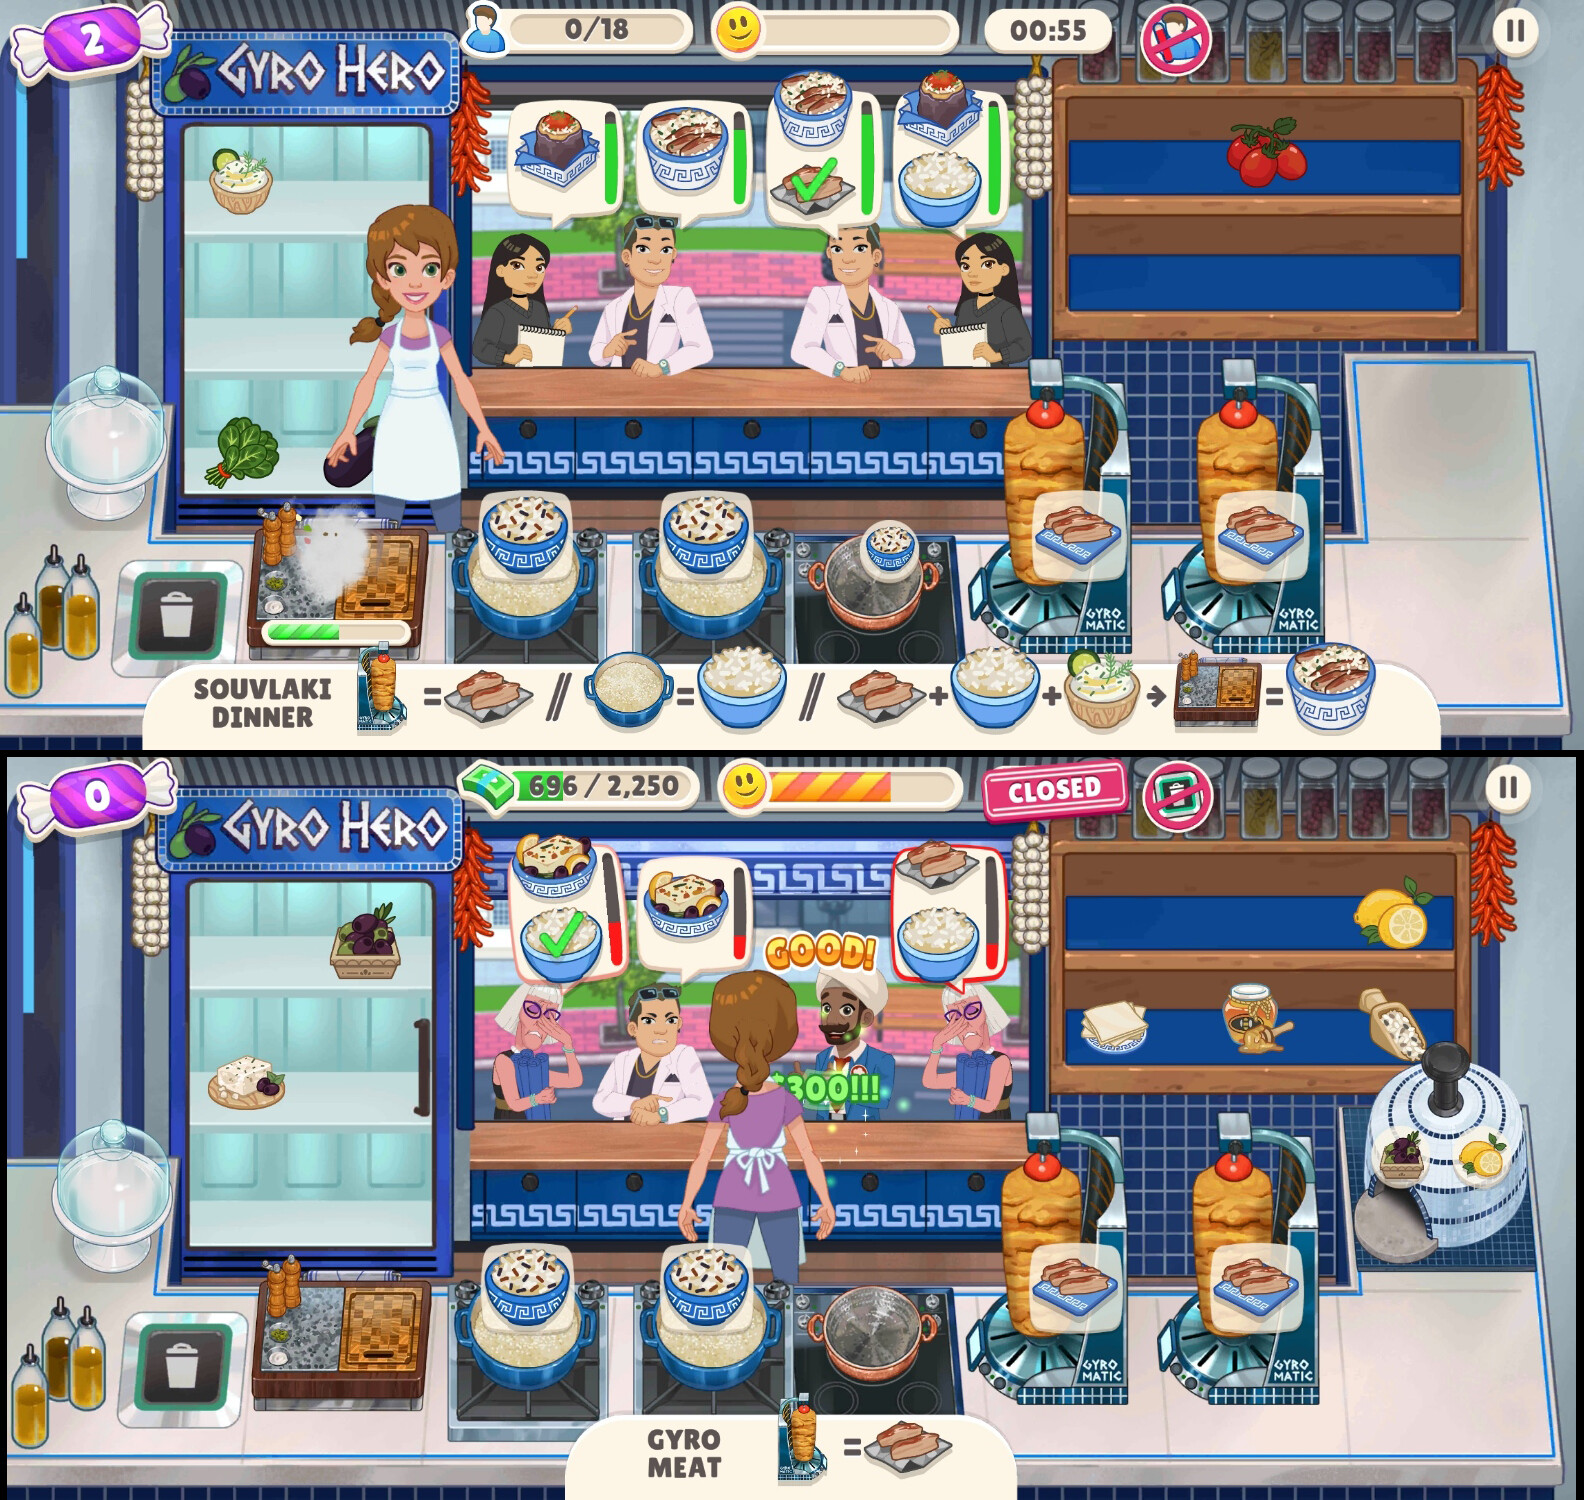 Kitchen Gameplay Screenshot

Each world had a unique kitchen background, set of customers, appliances, map, truck,and food items.

Kitchen and appliance art by me. Food and customers by me and Danielle Magpayo. UI by Shannon Conrad.